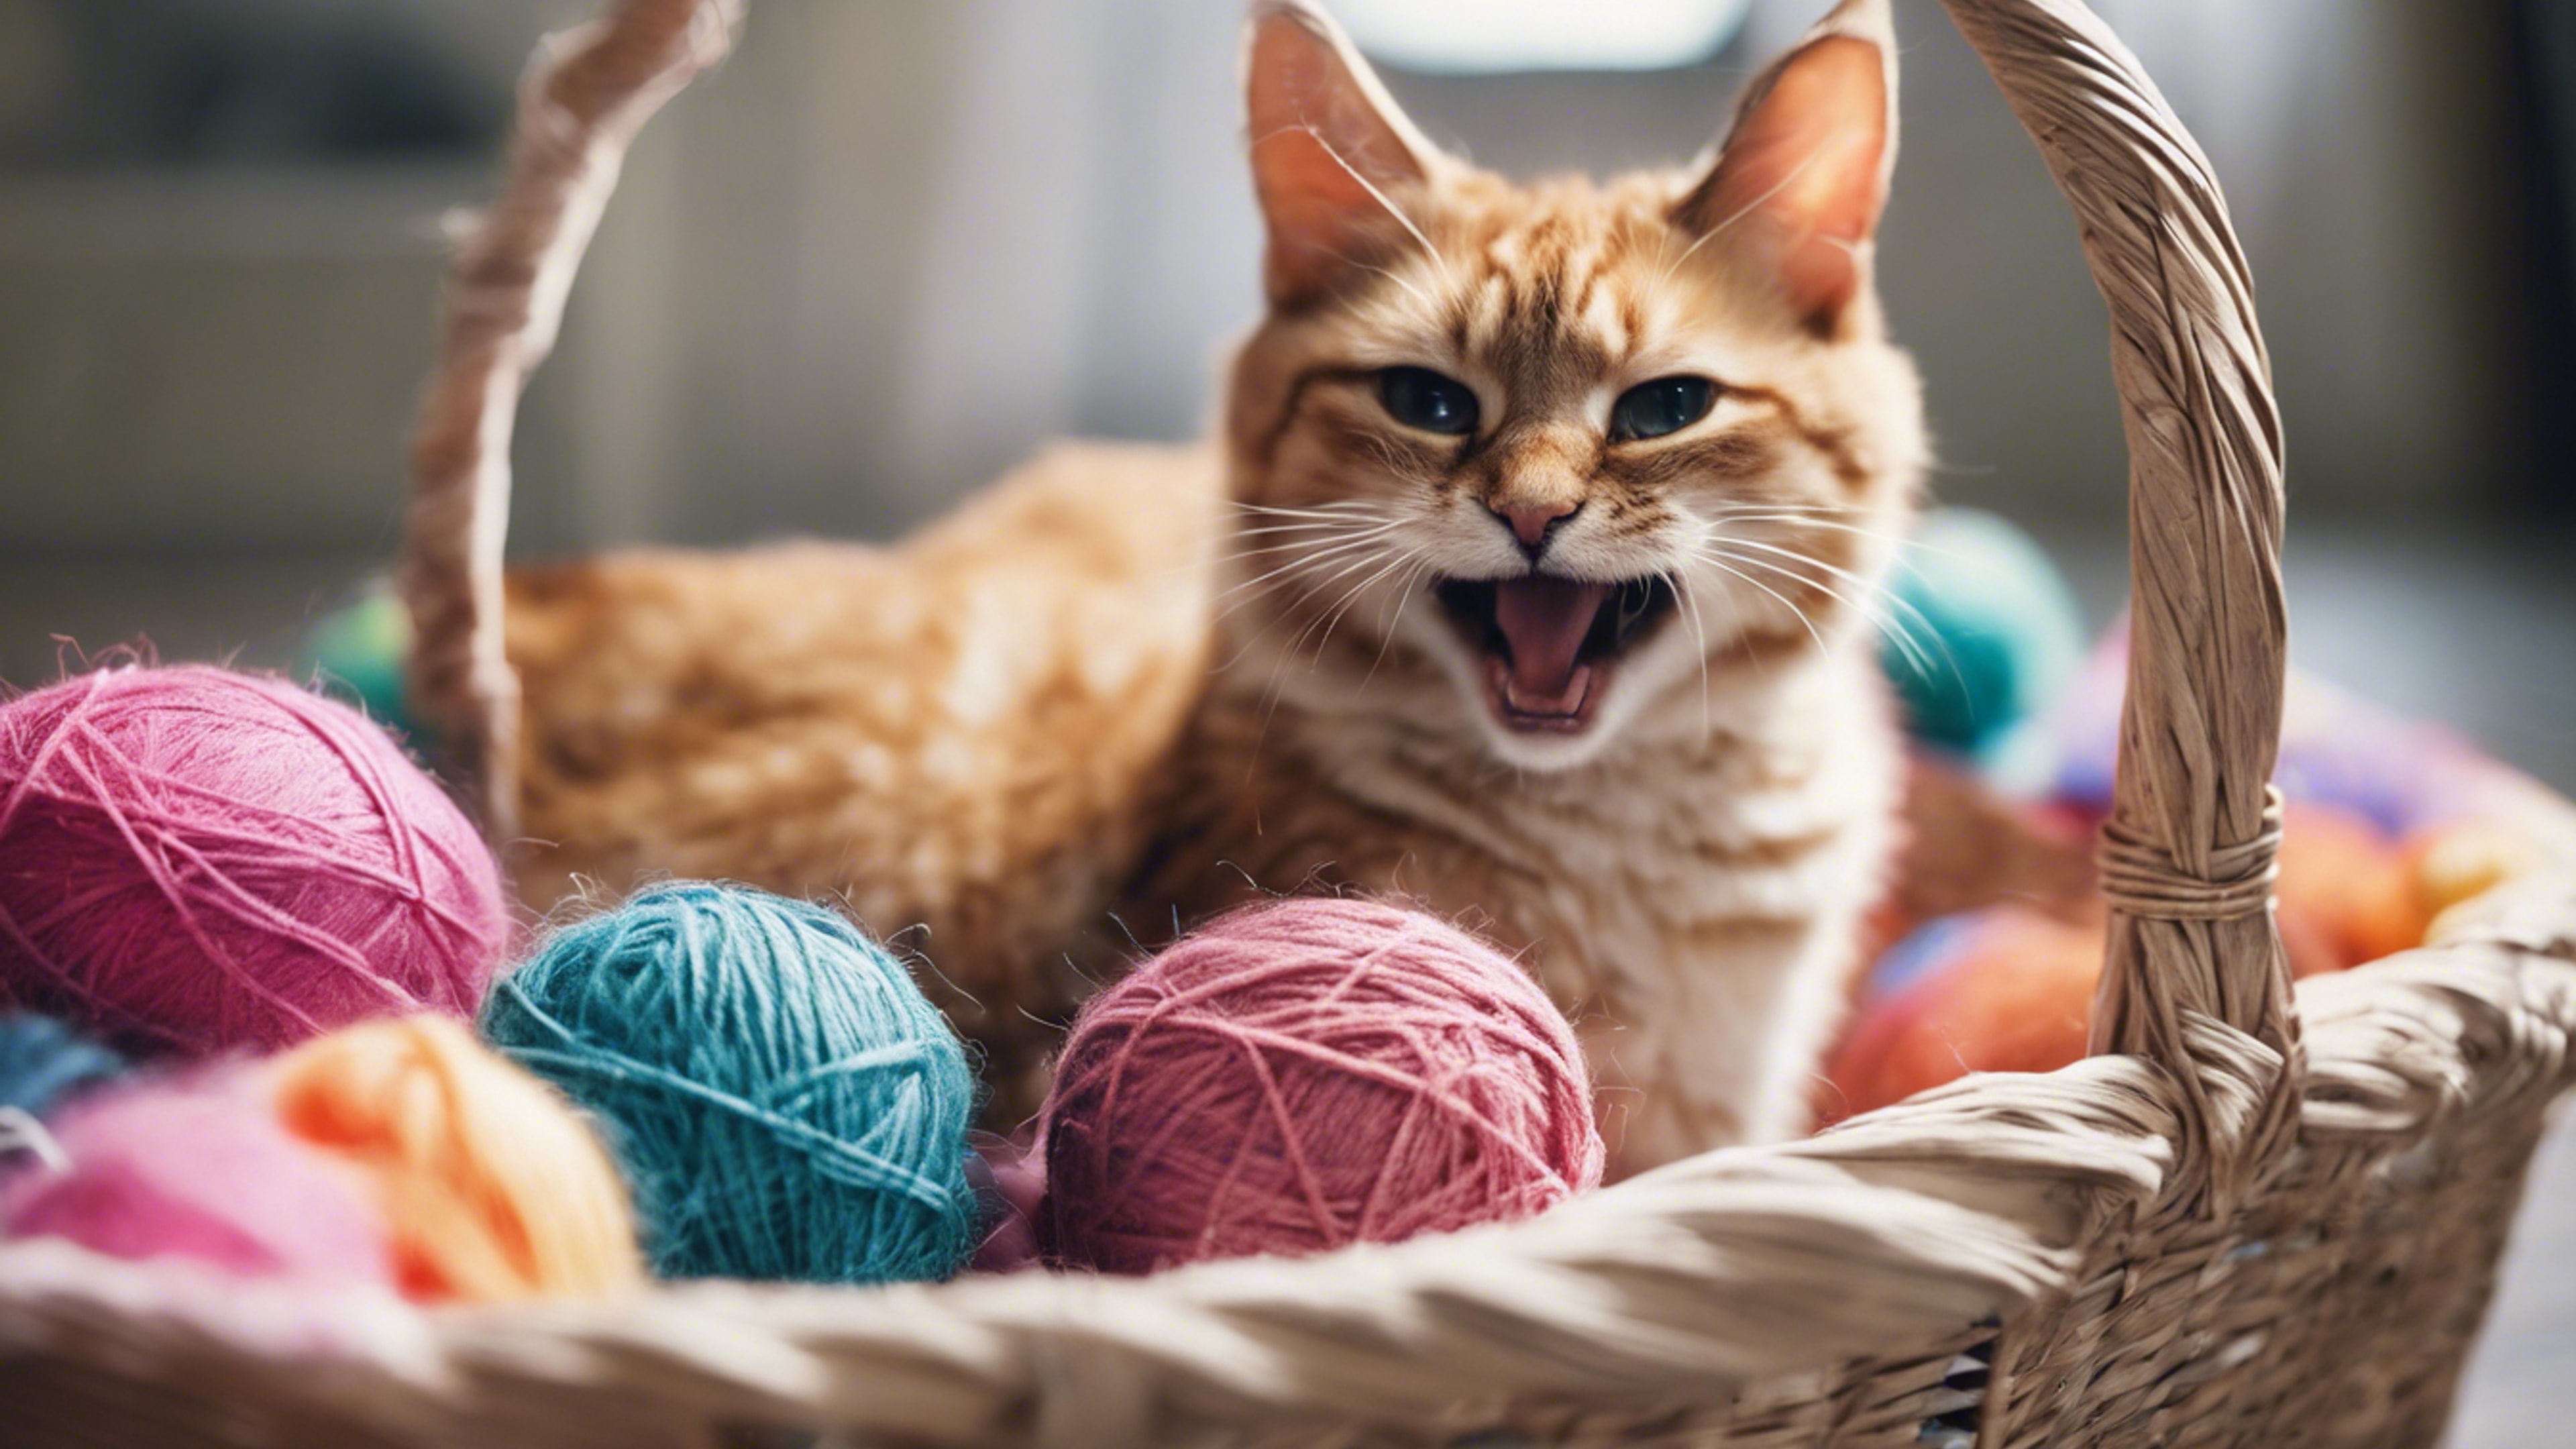 A cat mid-yawn in a basket filled with soft, colorful balls of yarn. Tapeta[4de2b2f4a75d42f7bbf8]